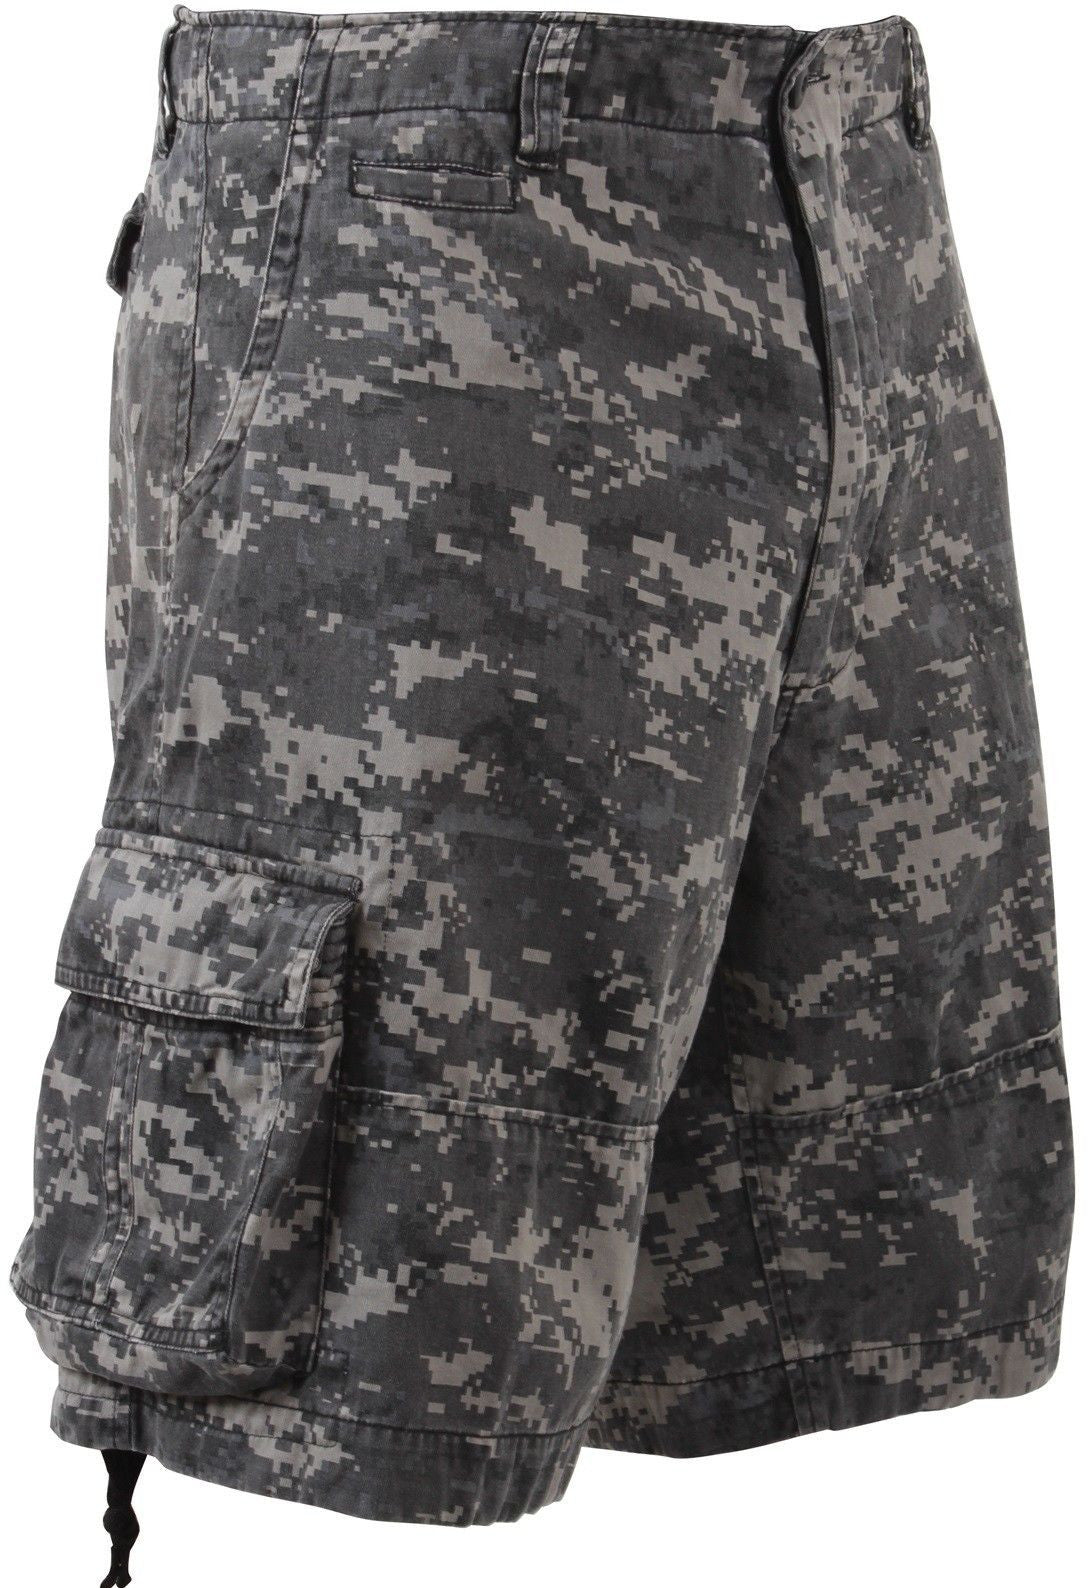 Vintage Infantry Cargo Relaxed Force - Camo Digital Shorts – Grunt Shorts - Utility